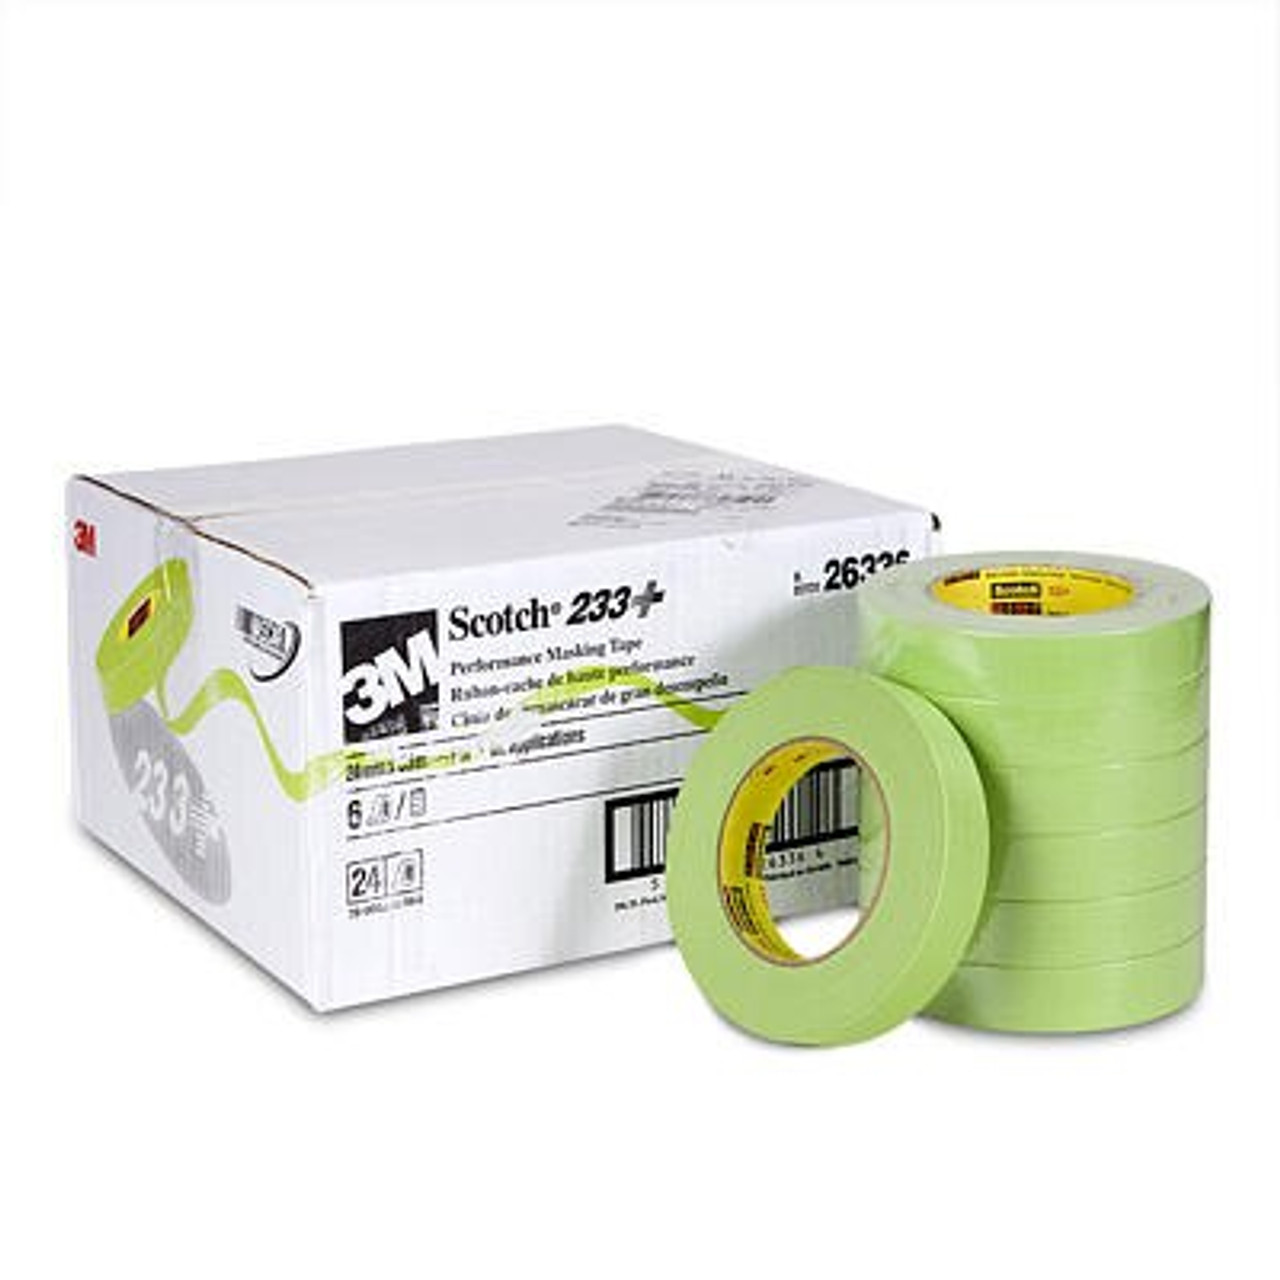 3M Scotch 2060 Crepe Paper Lacquer Painters Masking Tape, 24 lbs